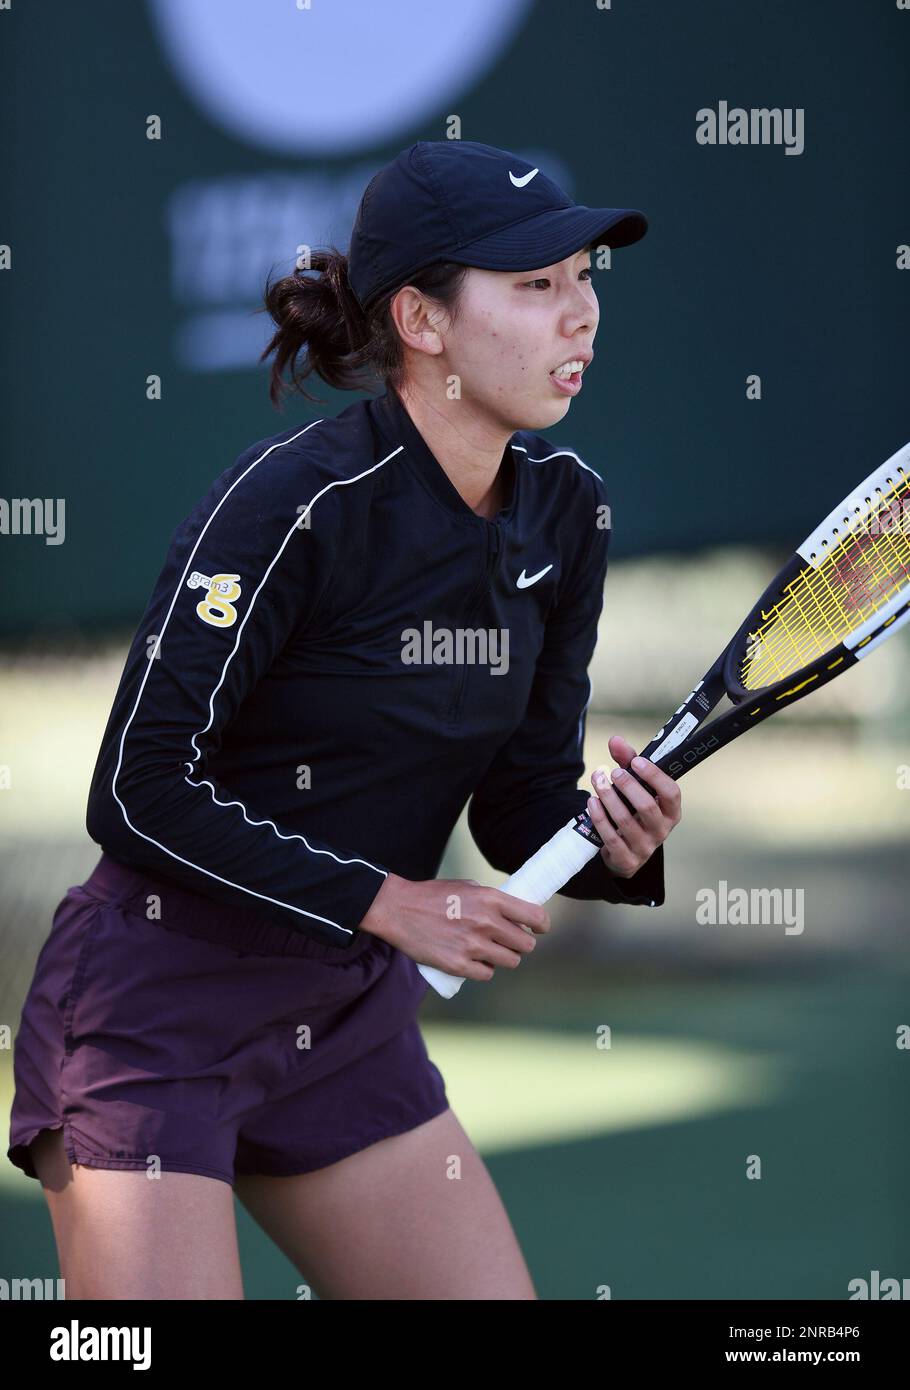 NEWPORT BEACH, CA - JANUARY 29: WTA tennis player Mayo Hibi (JPN) waits for  a serve in a match during the Oracle Challenger Series played on January  29, 2020 at the Newport